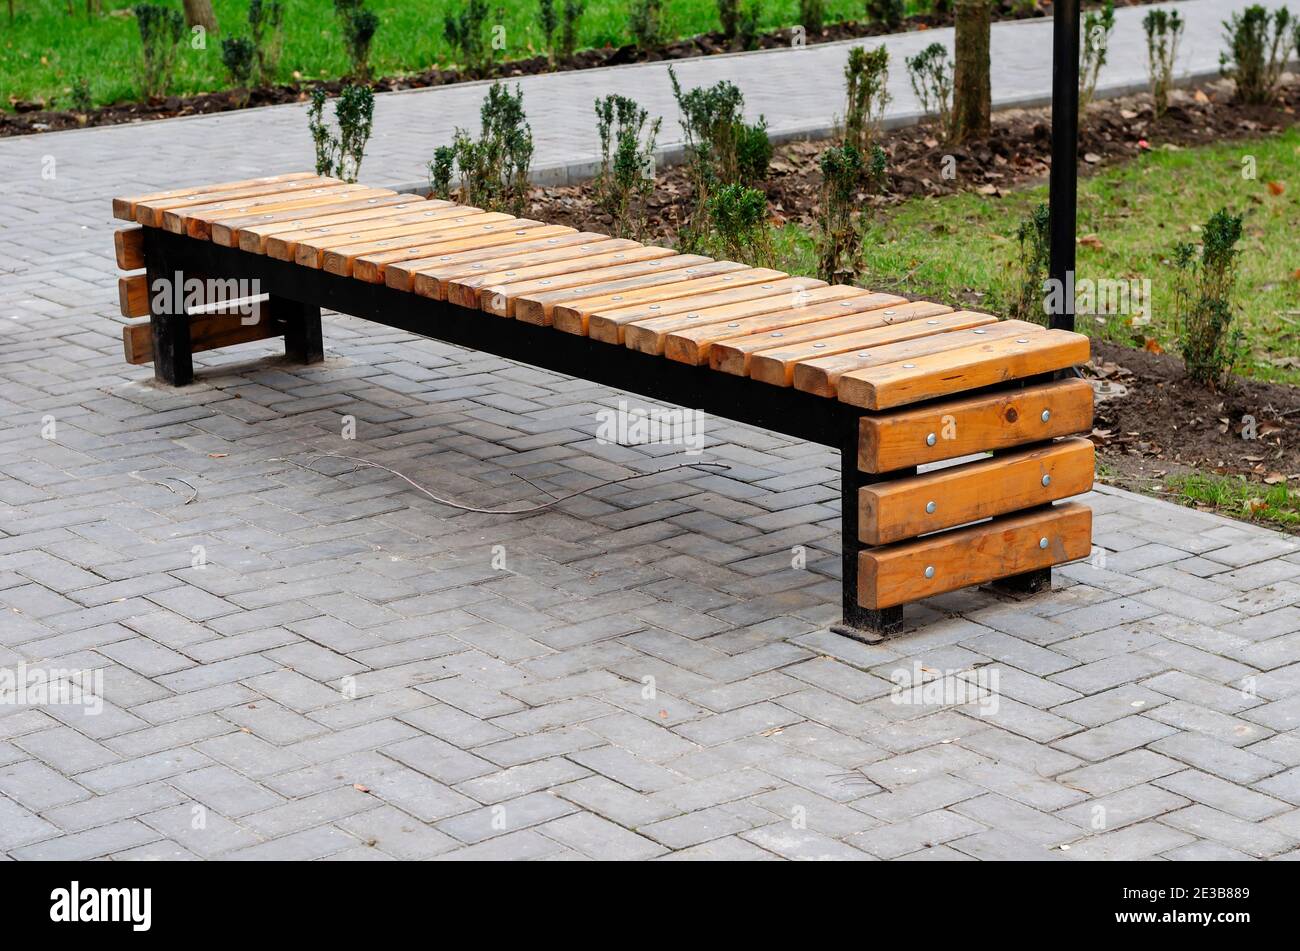 mengen Explosieven Smerig Creative empty wooden park bench. U-shaped bench made of metal and wooden  bars. Modern urban lifestyle Stock Photo - Alamy